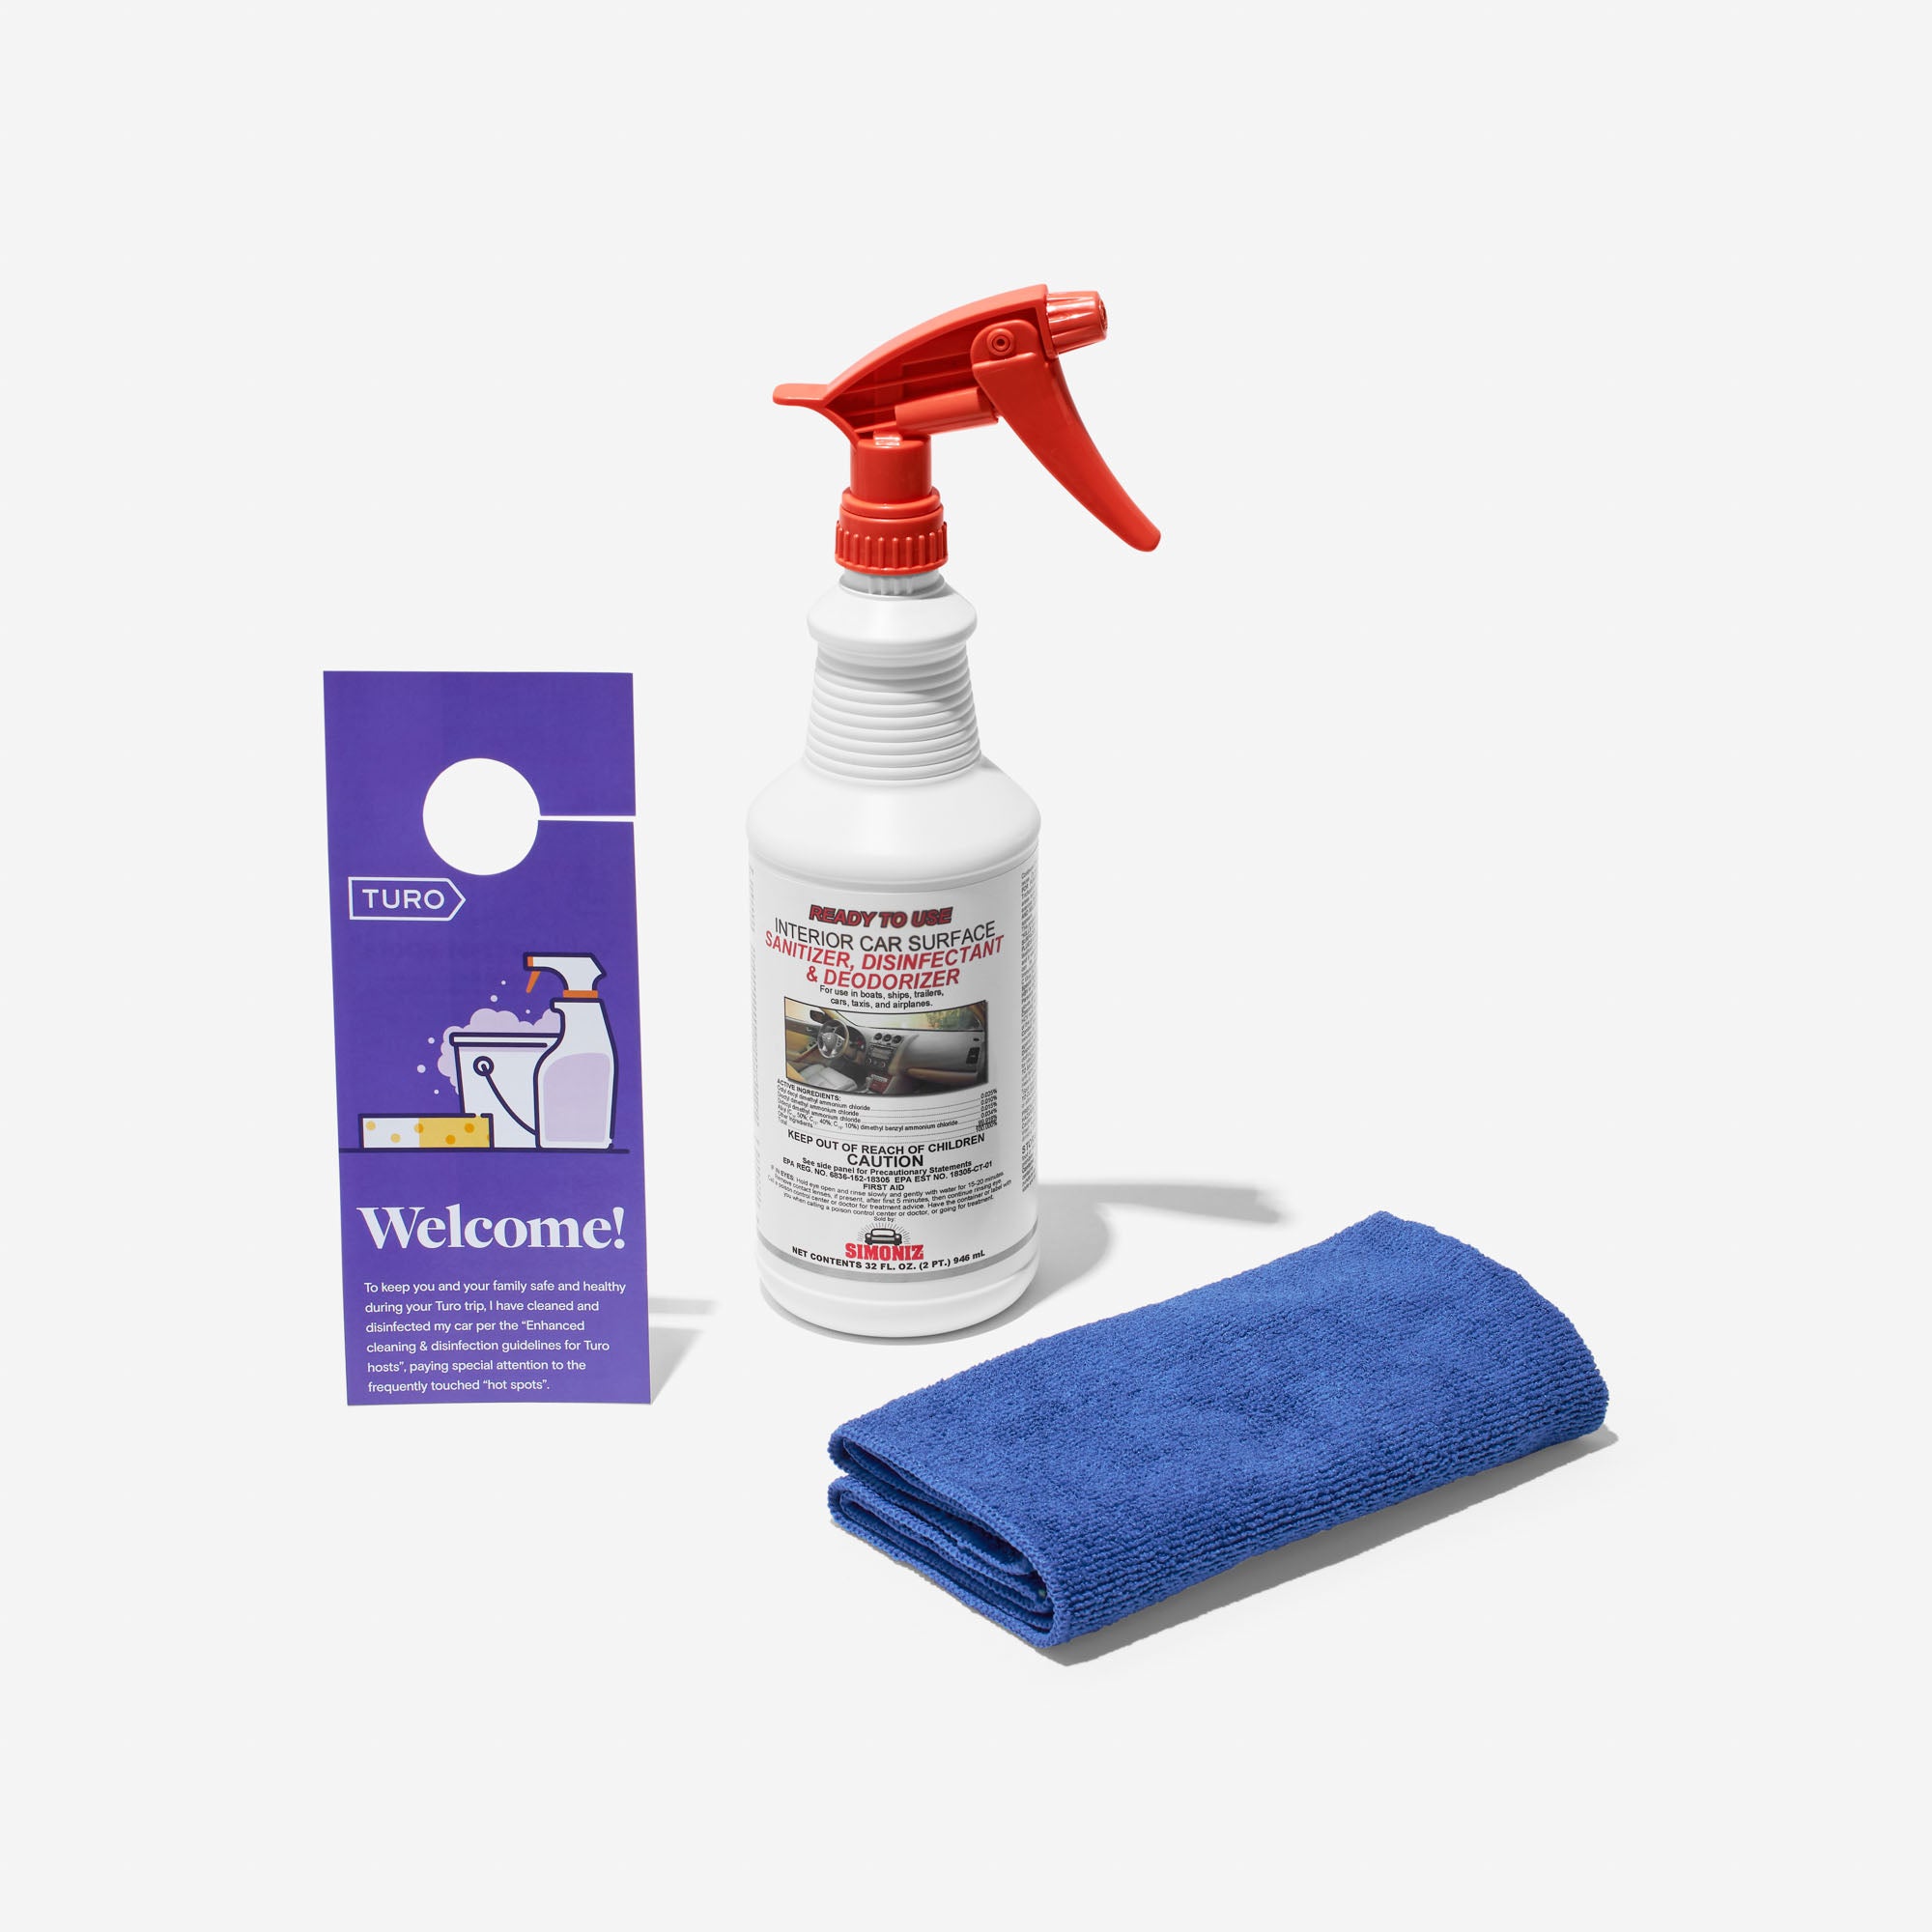 Spiffy® complete disinfectant kit